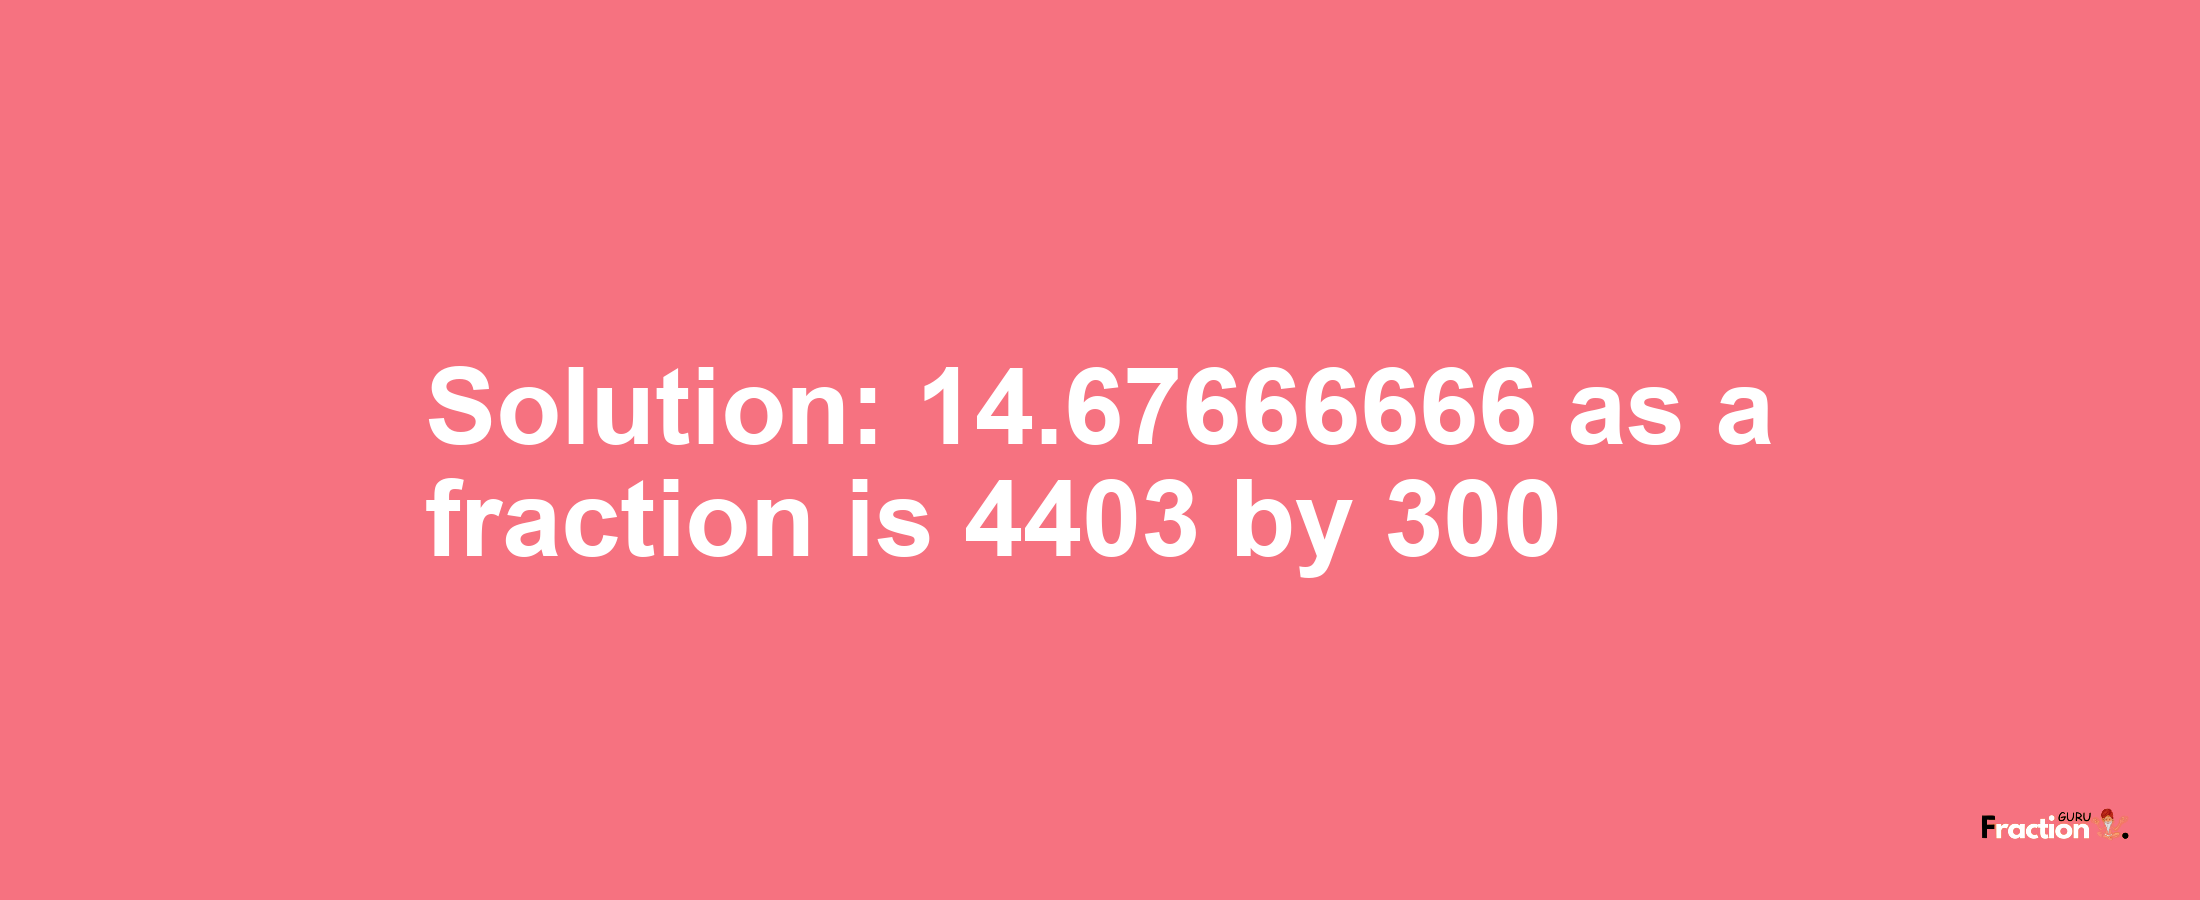 Solution:14.67666666 as a fraction is 4403/300